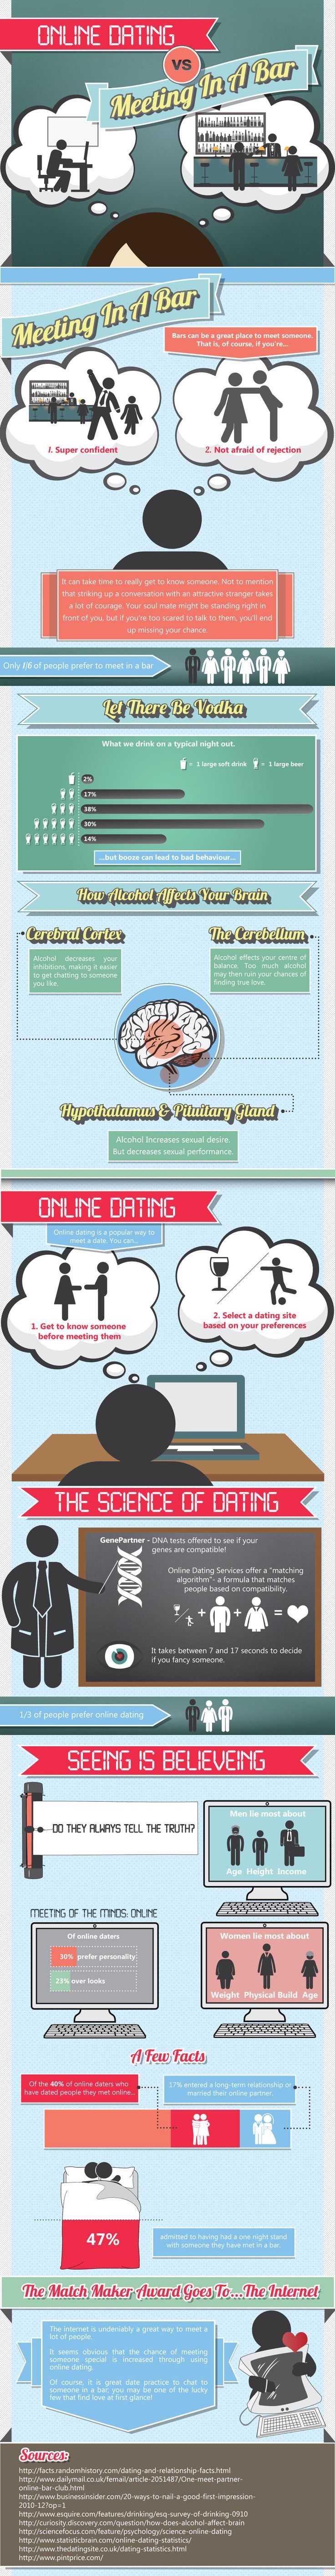 Online Dating Vs Meeting In A Bar